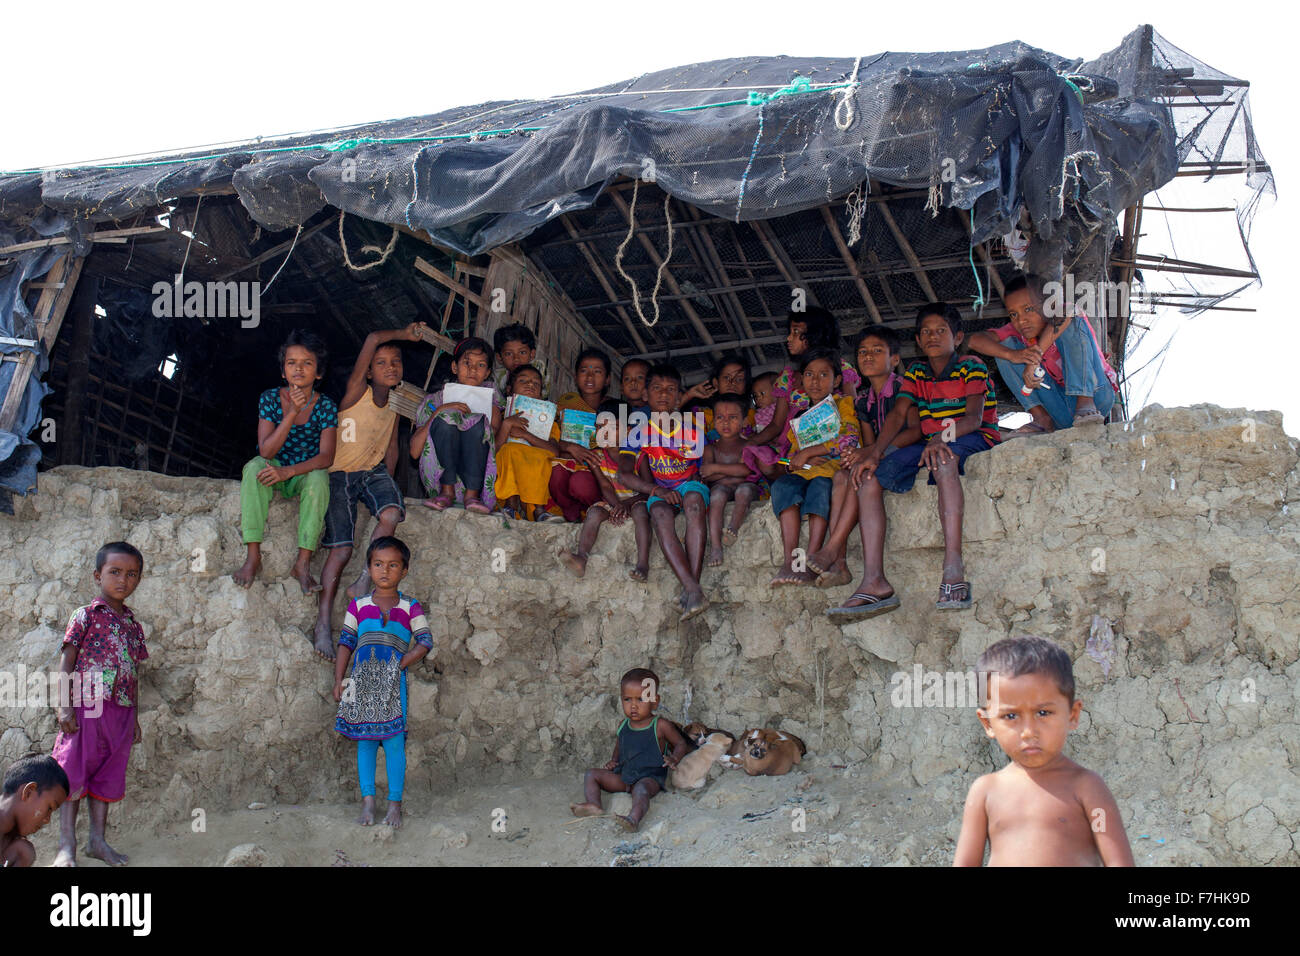 COX's BAZAR, BANGLADESH - November 29:  Children  inside a Climate Change and Sea Level Raise affected broken house  in Kutubdia Island of Cox's Bazar District on November 29, 2015.  Kutubdia, an island off the Cox's Bazar coast. the adversities of nature induced mainly by climate change. During the last two decades the impacts of climate in Bangladesh have been accellerating.Kutubdia is also hit hard. The place is very vulnerable to cyclones and storm surges, which have become more frequent and intense in Bangladesh, as well as rising sea-level and stronger waves. The result is massive erosio Stock Photo